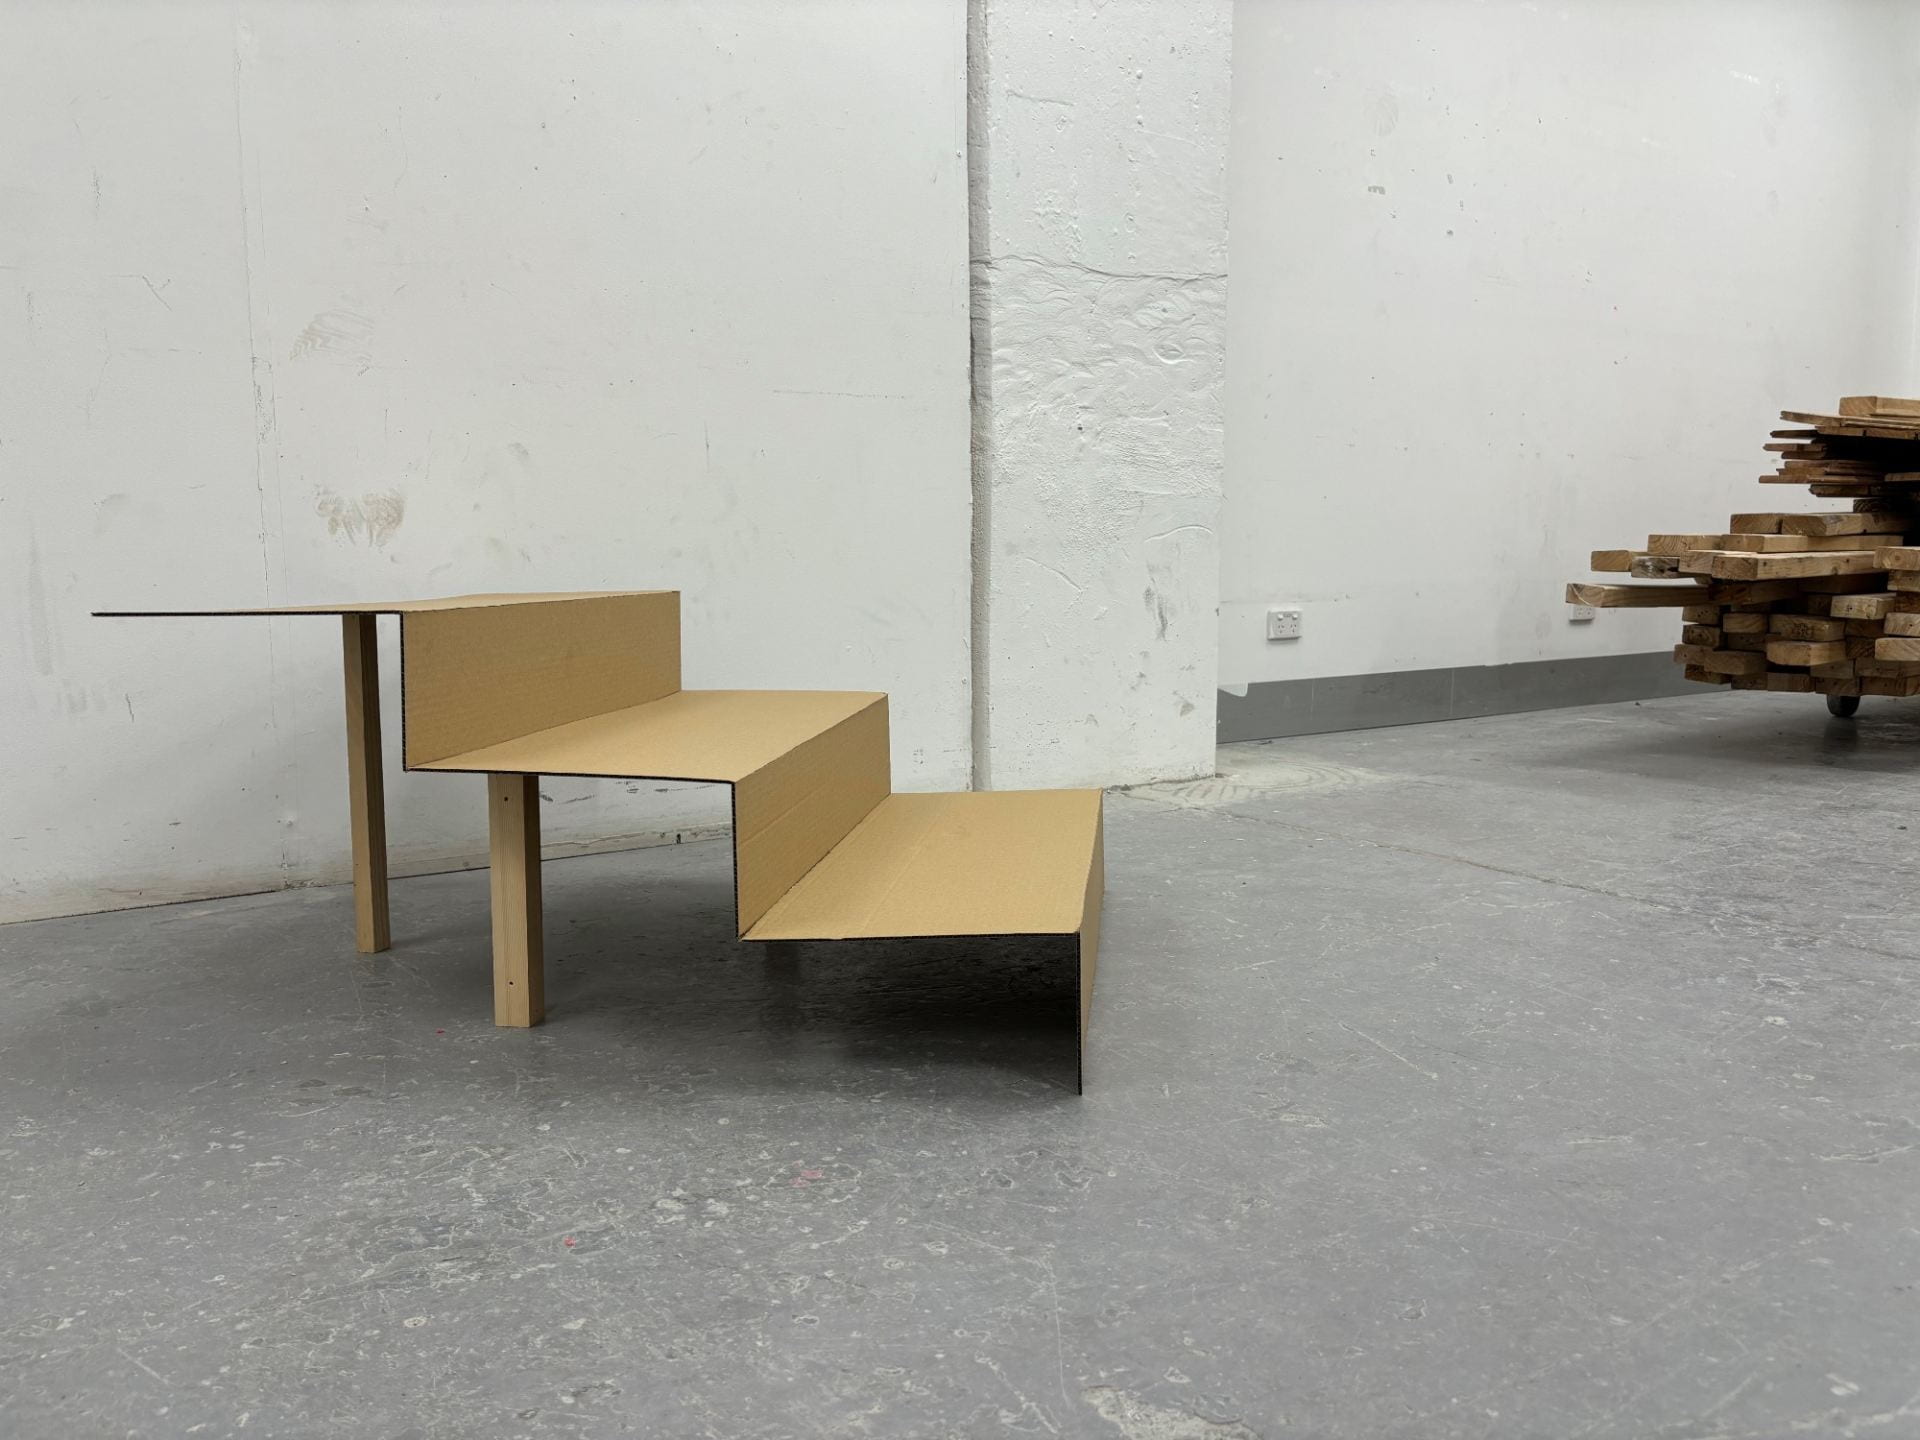 A cardboard model of a stair resting on wooden posts